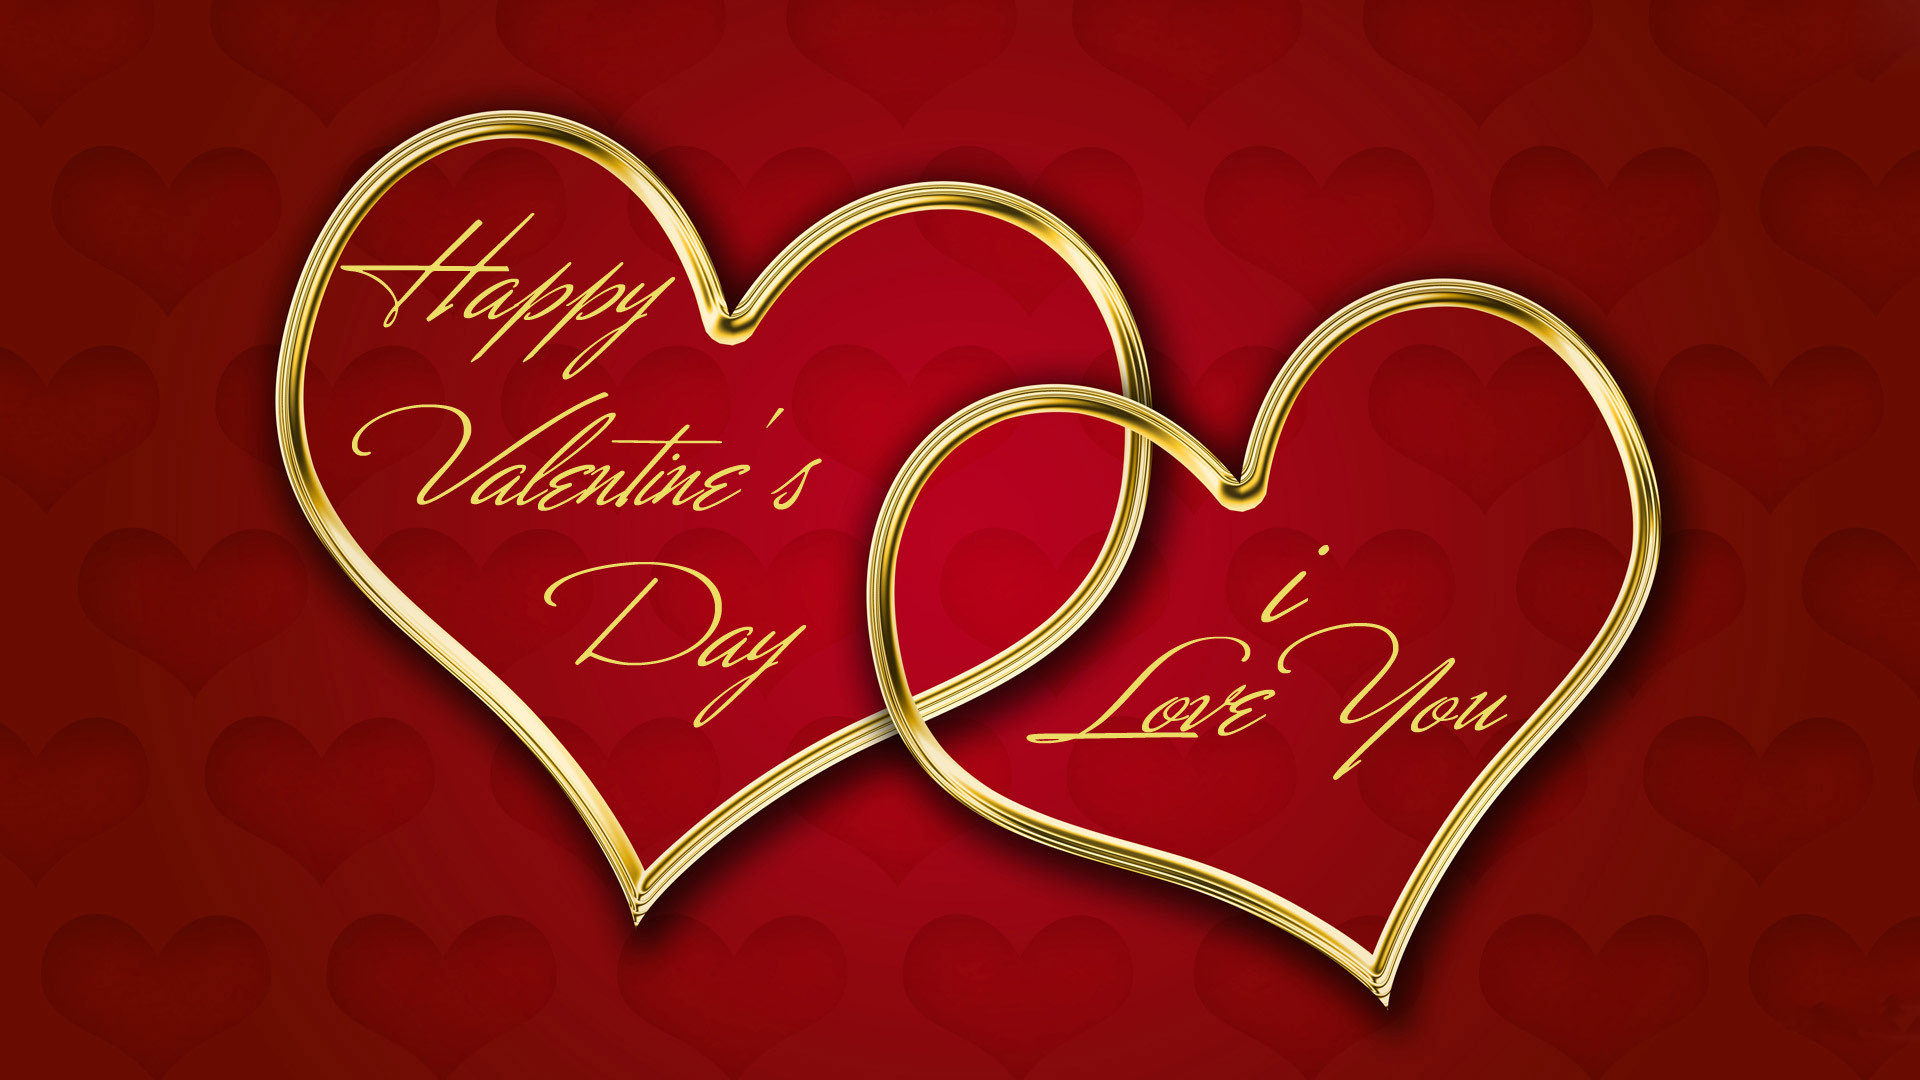 1920x1080 Happy Valentines Day Red Wallpaper HD